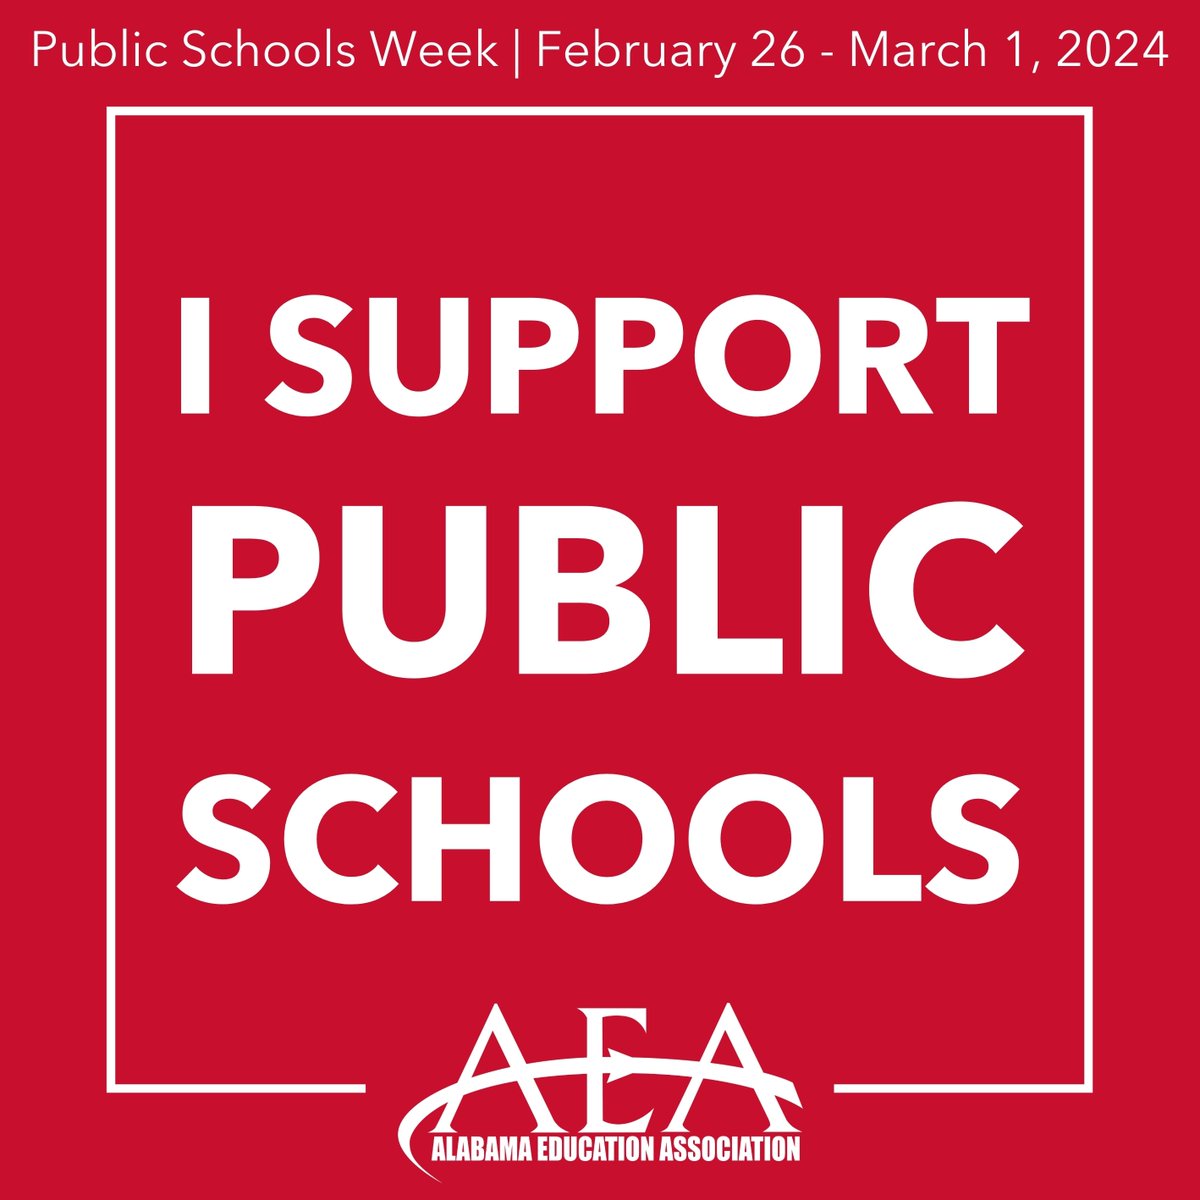 It's #PublicSchoolsWeek! Join us in celebrating the outstanding educators who make Alabama's public schools successful. Share this post to let your followers know you support public schools! #myAEA